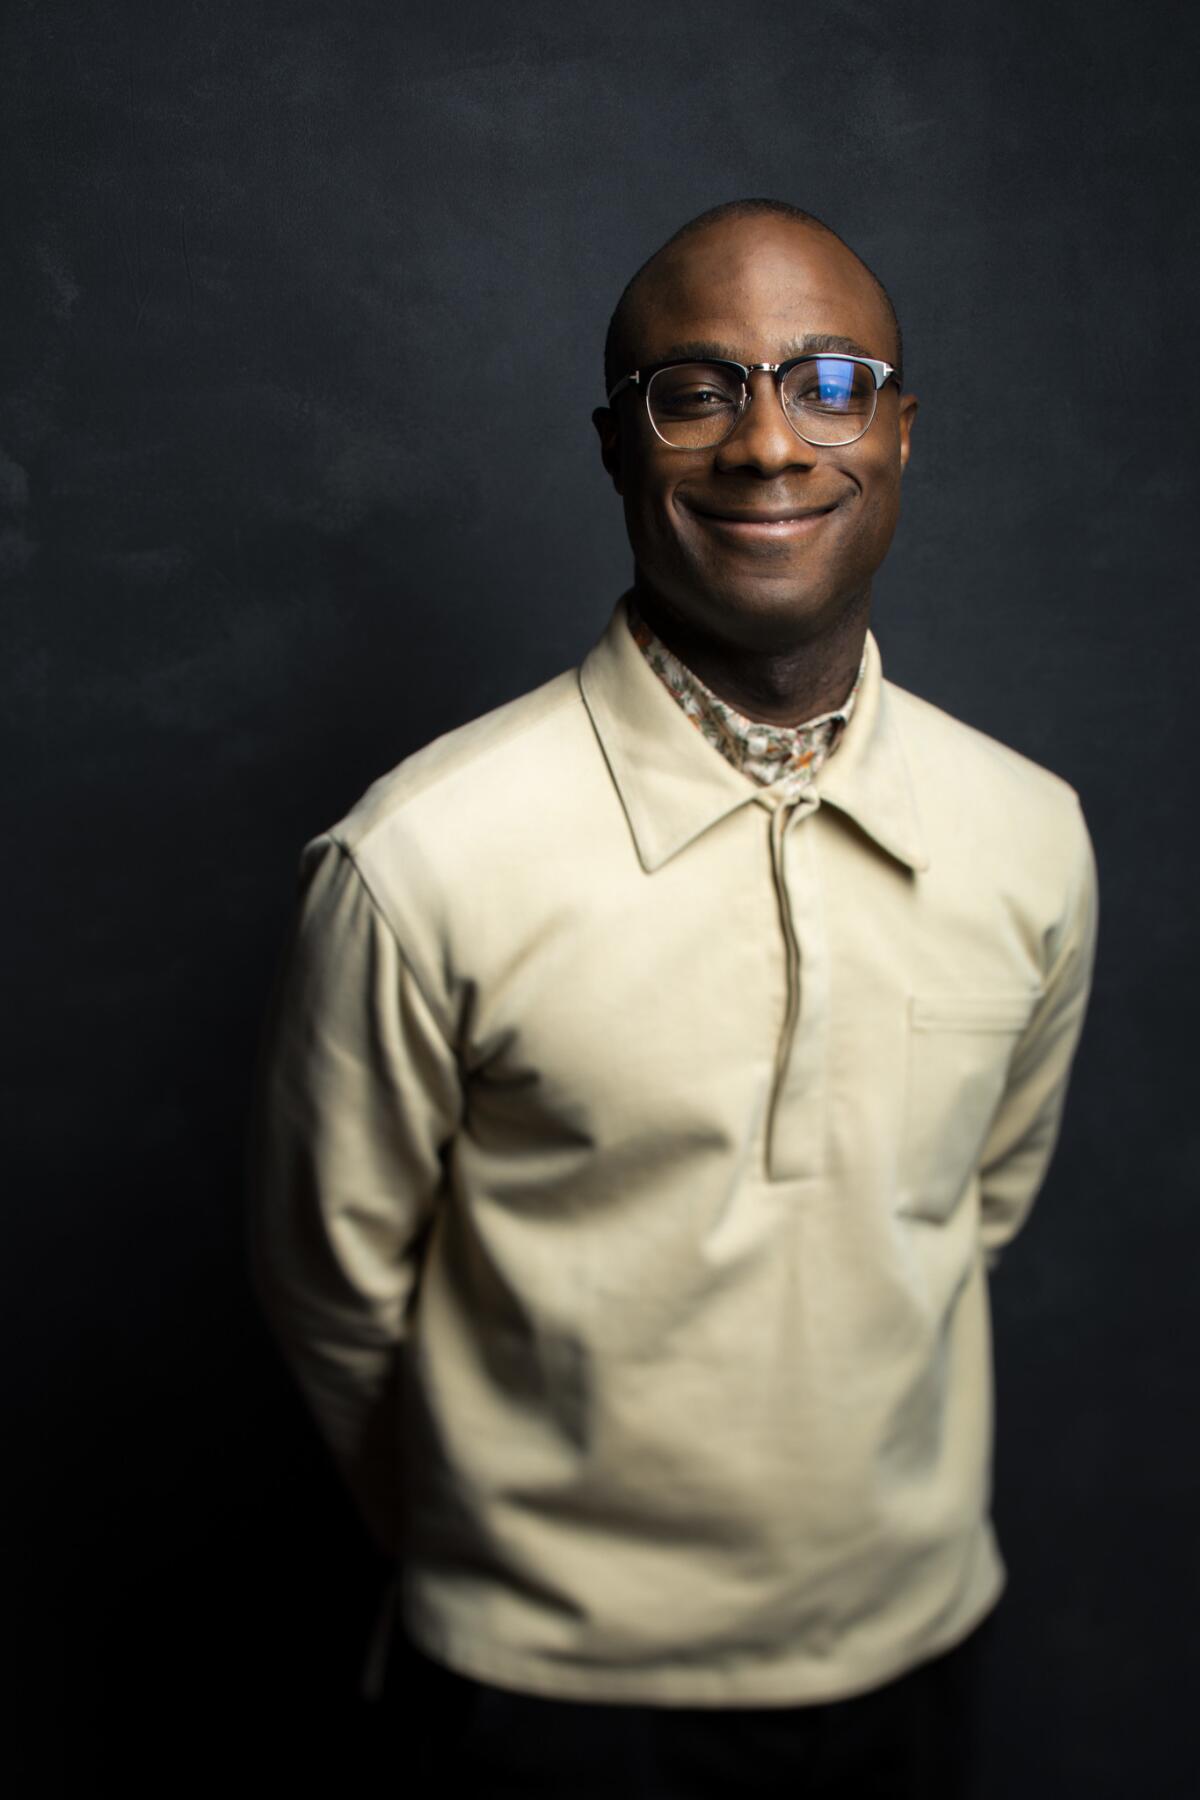 Director Barry Jenkins, from the film "If Beale Street Could Talk," photographed in the L.A. Times Photo and Video Studio at TIFF.